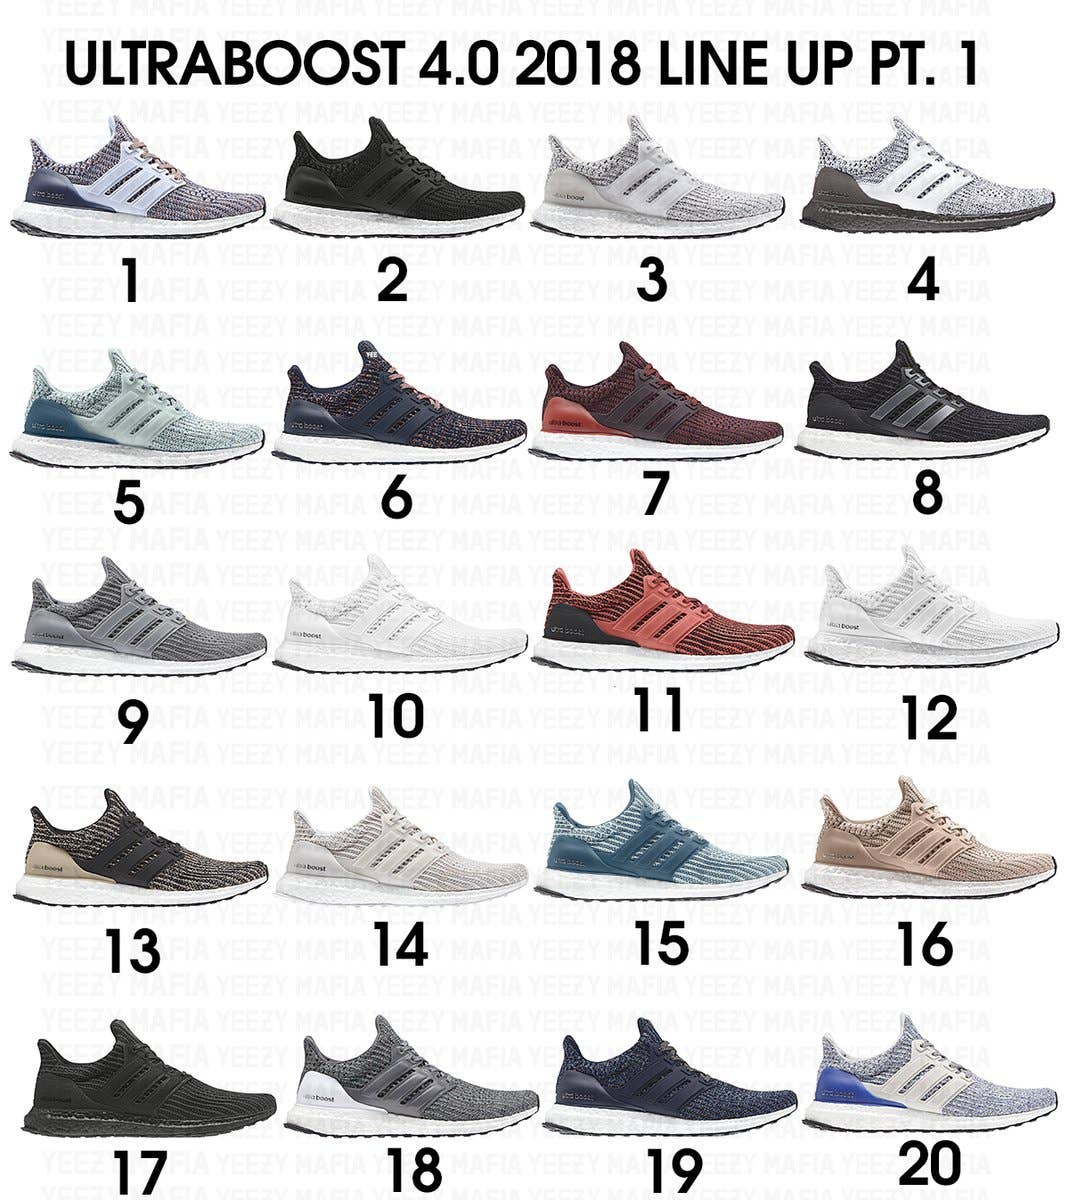 The 25 Best adidas Ultra Boost Colorways of All Time